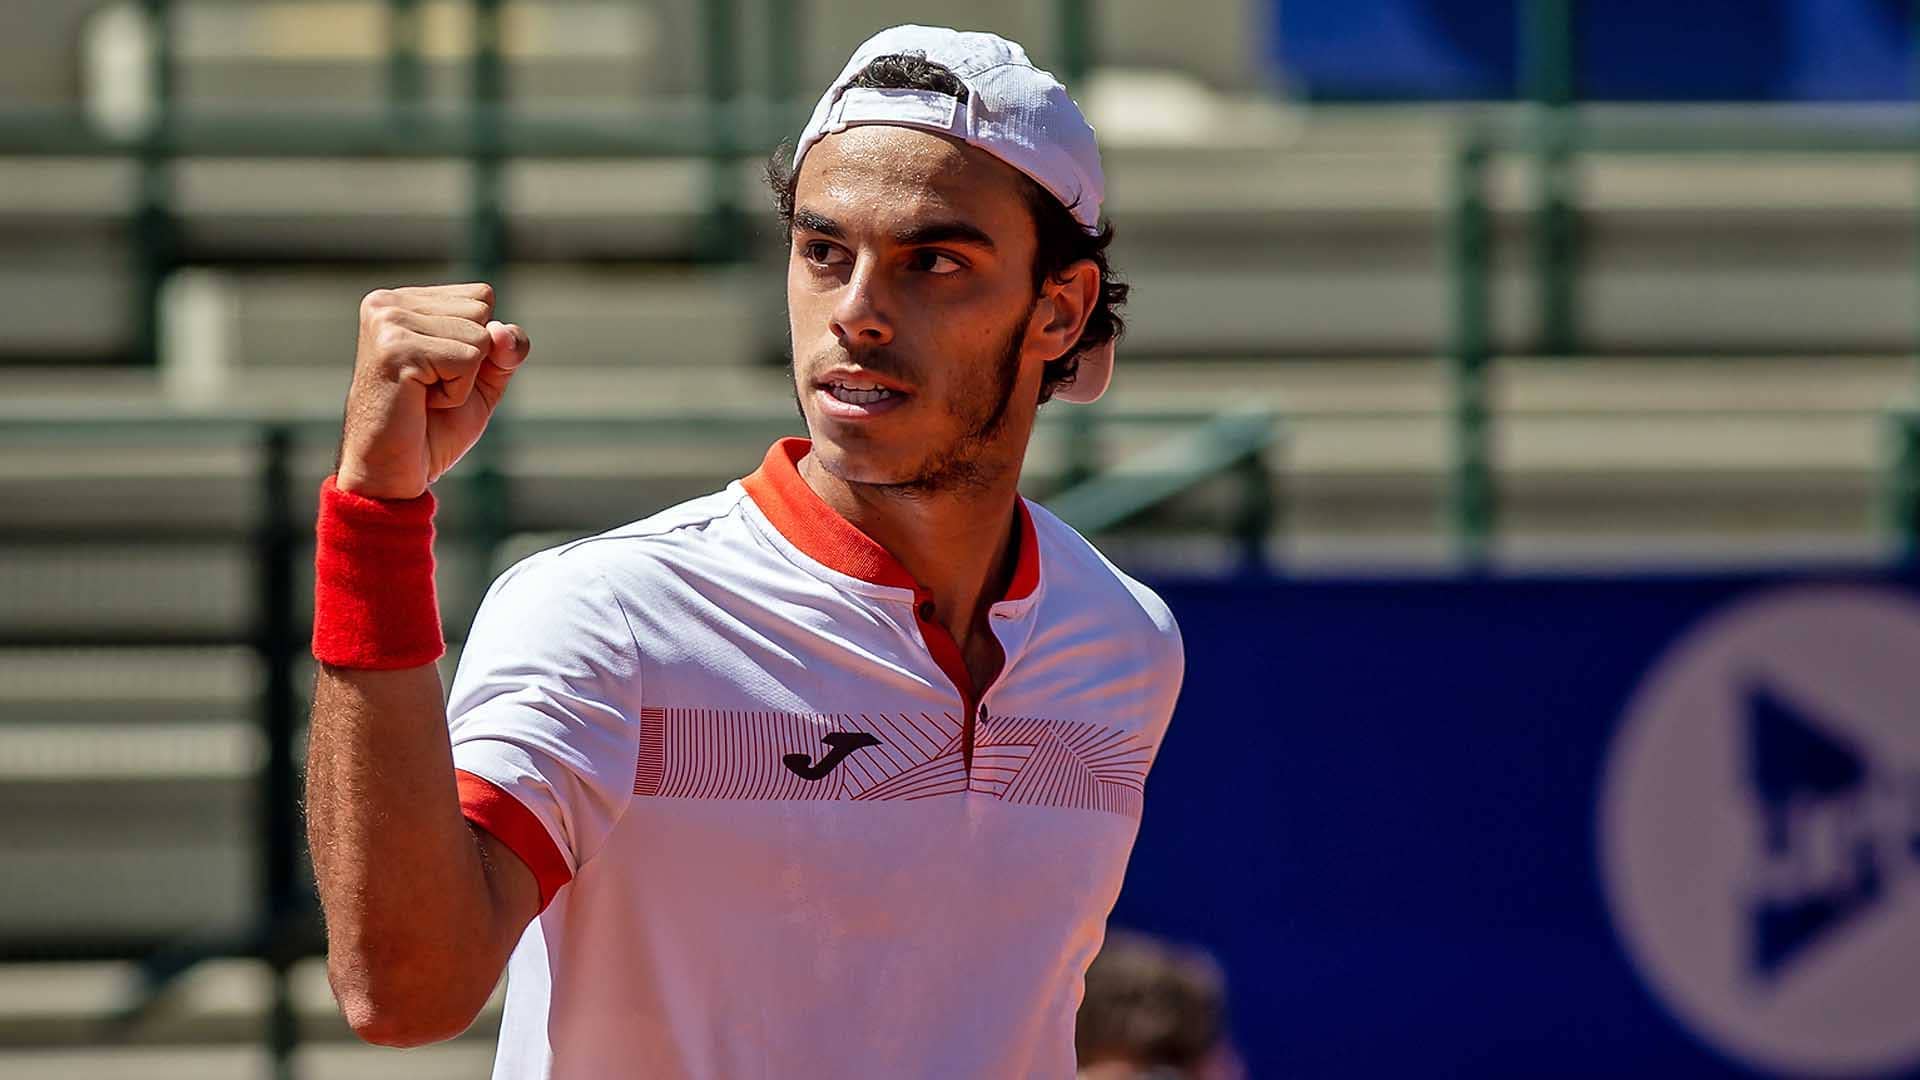 Qualifier Francisco Cerundolo reaches his first ATP Tour final on home soil at the Argentina Open in Buenos Aires.